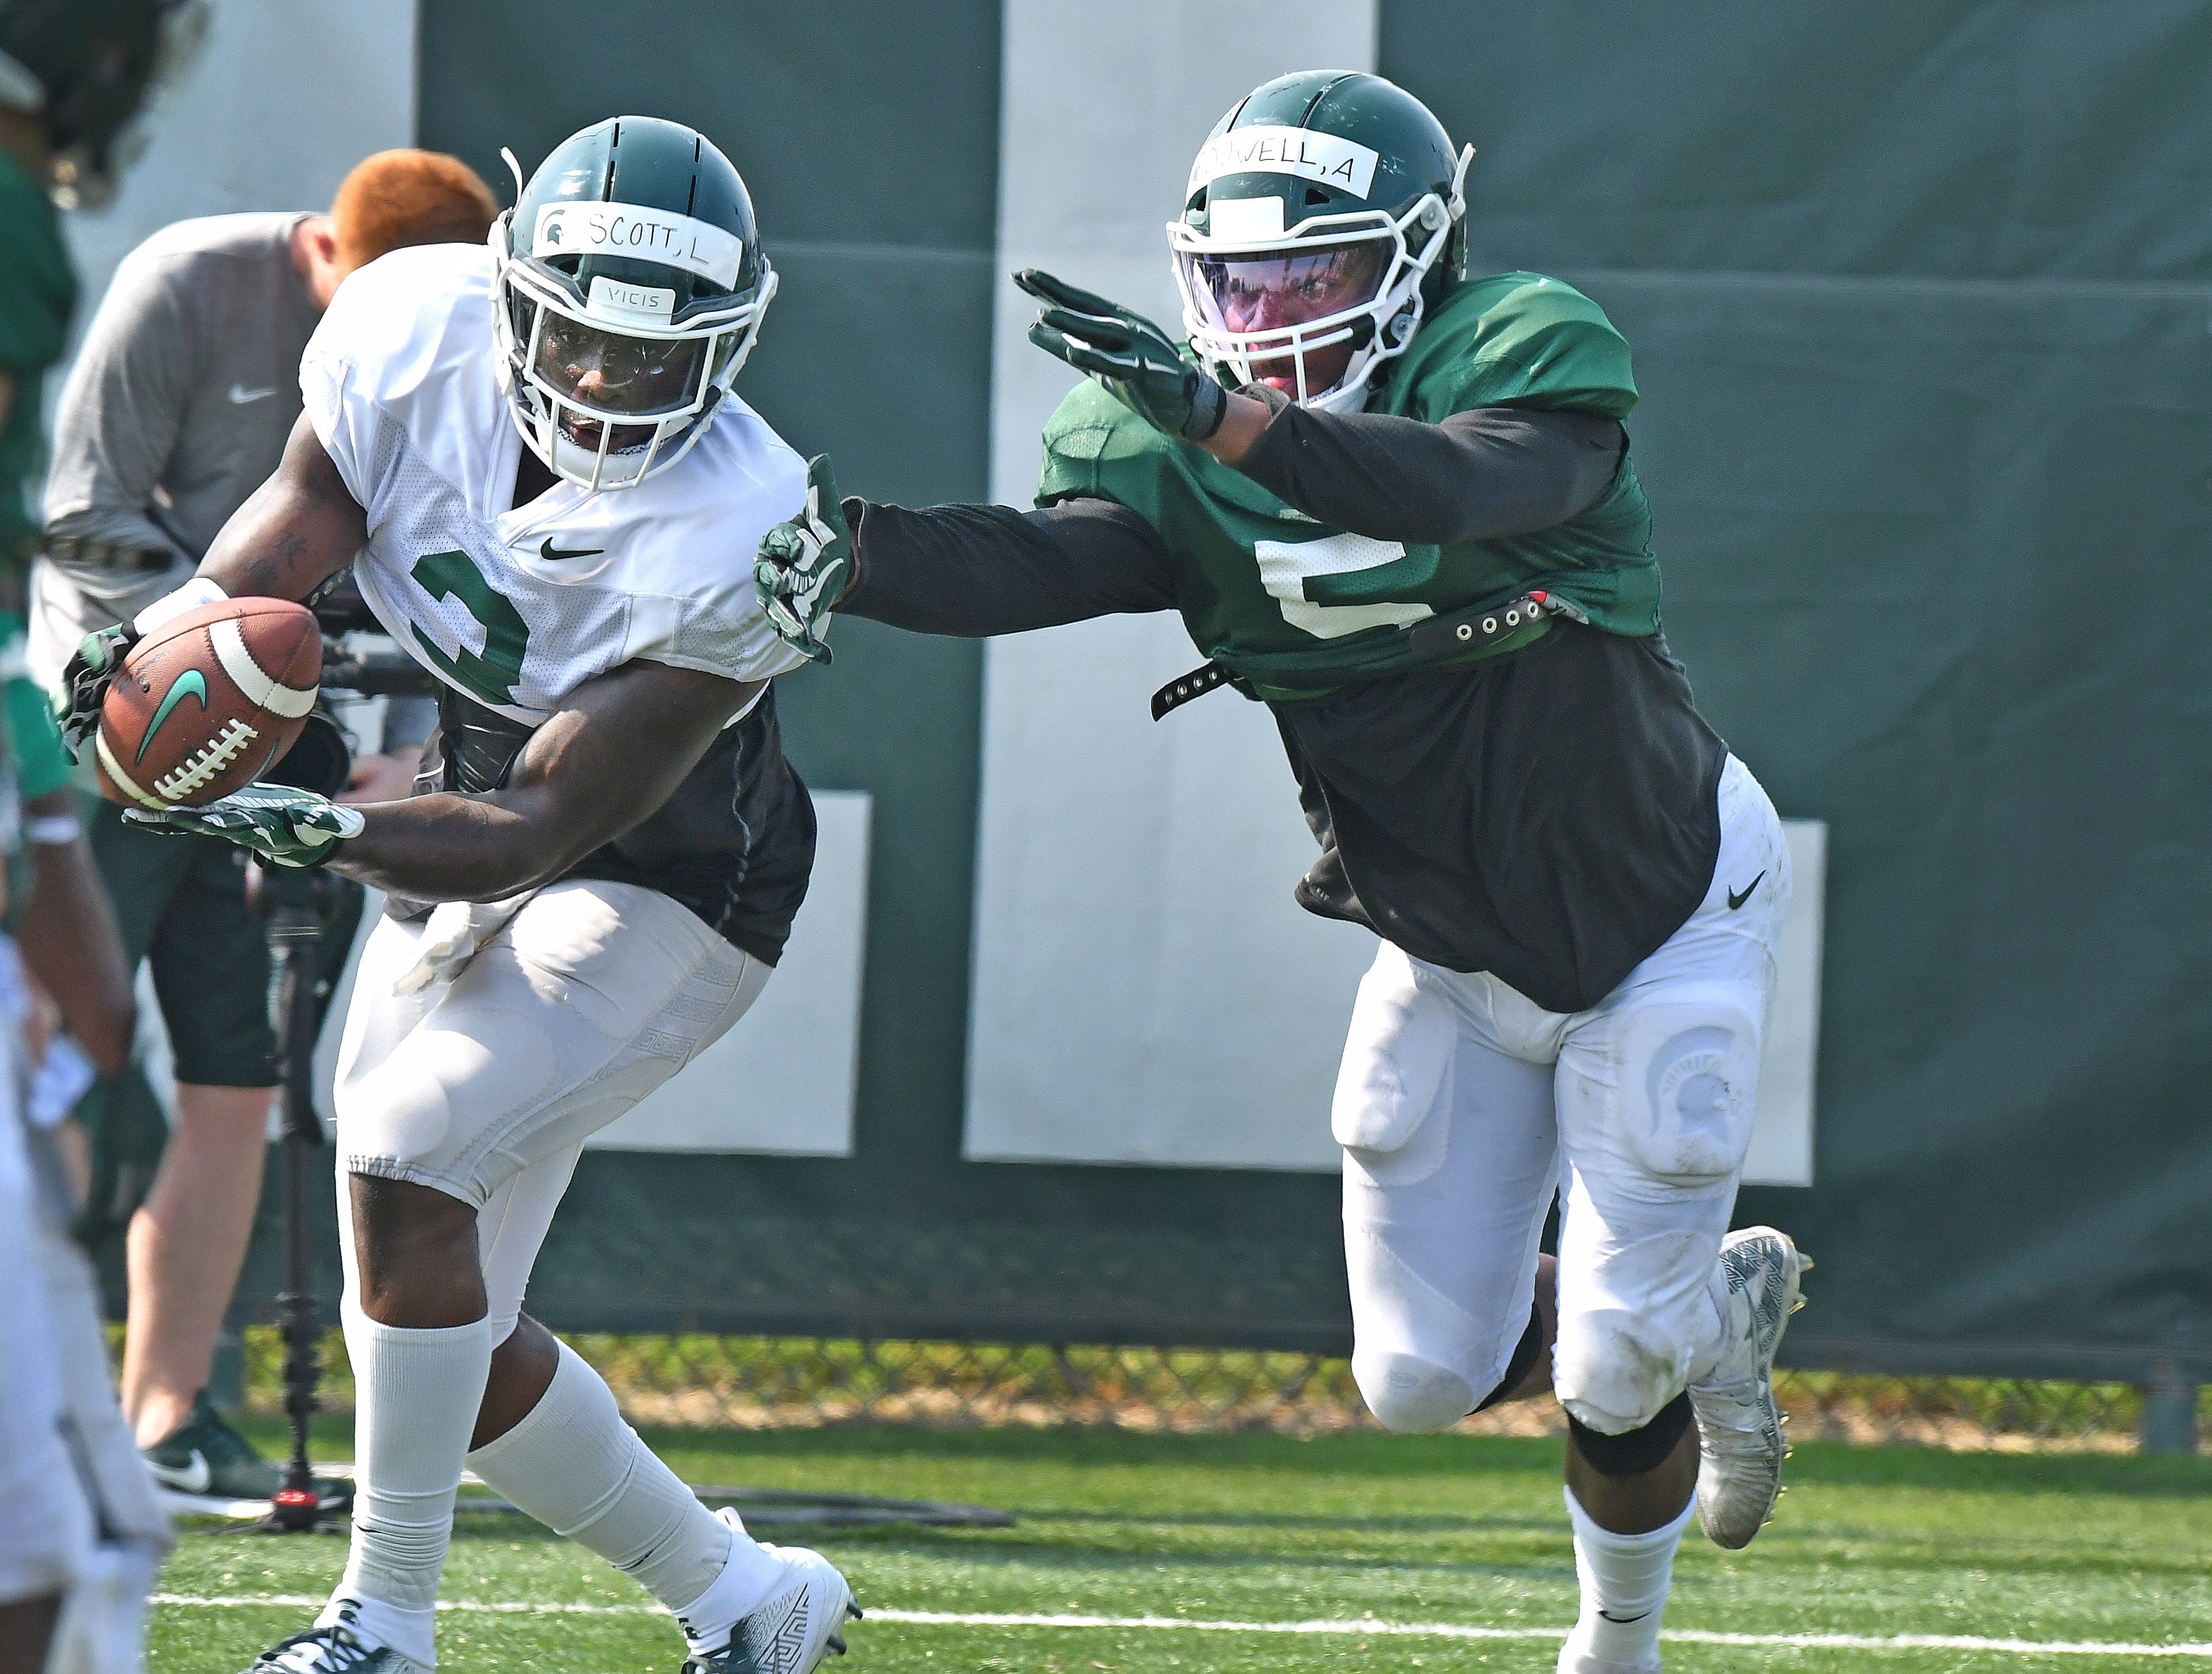 Michigan State veteran running back LJ Scott catches a pass in the end zone in spite of linebacker Andrw Dowell (5) .